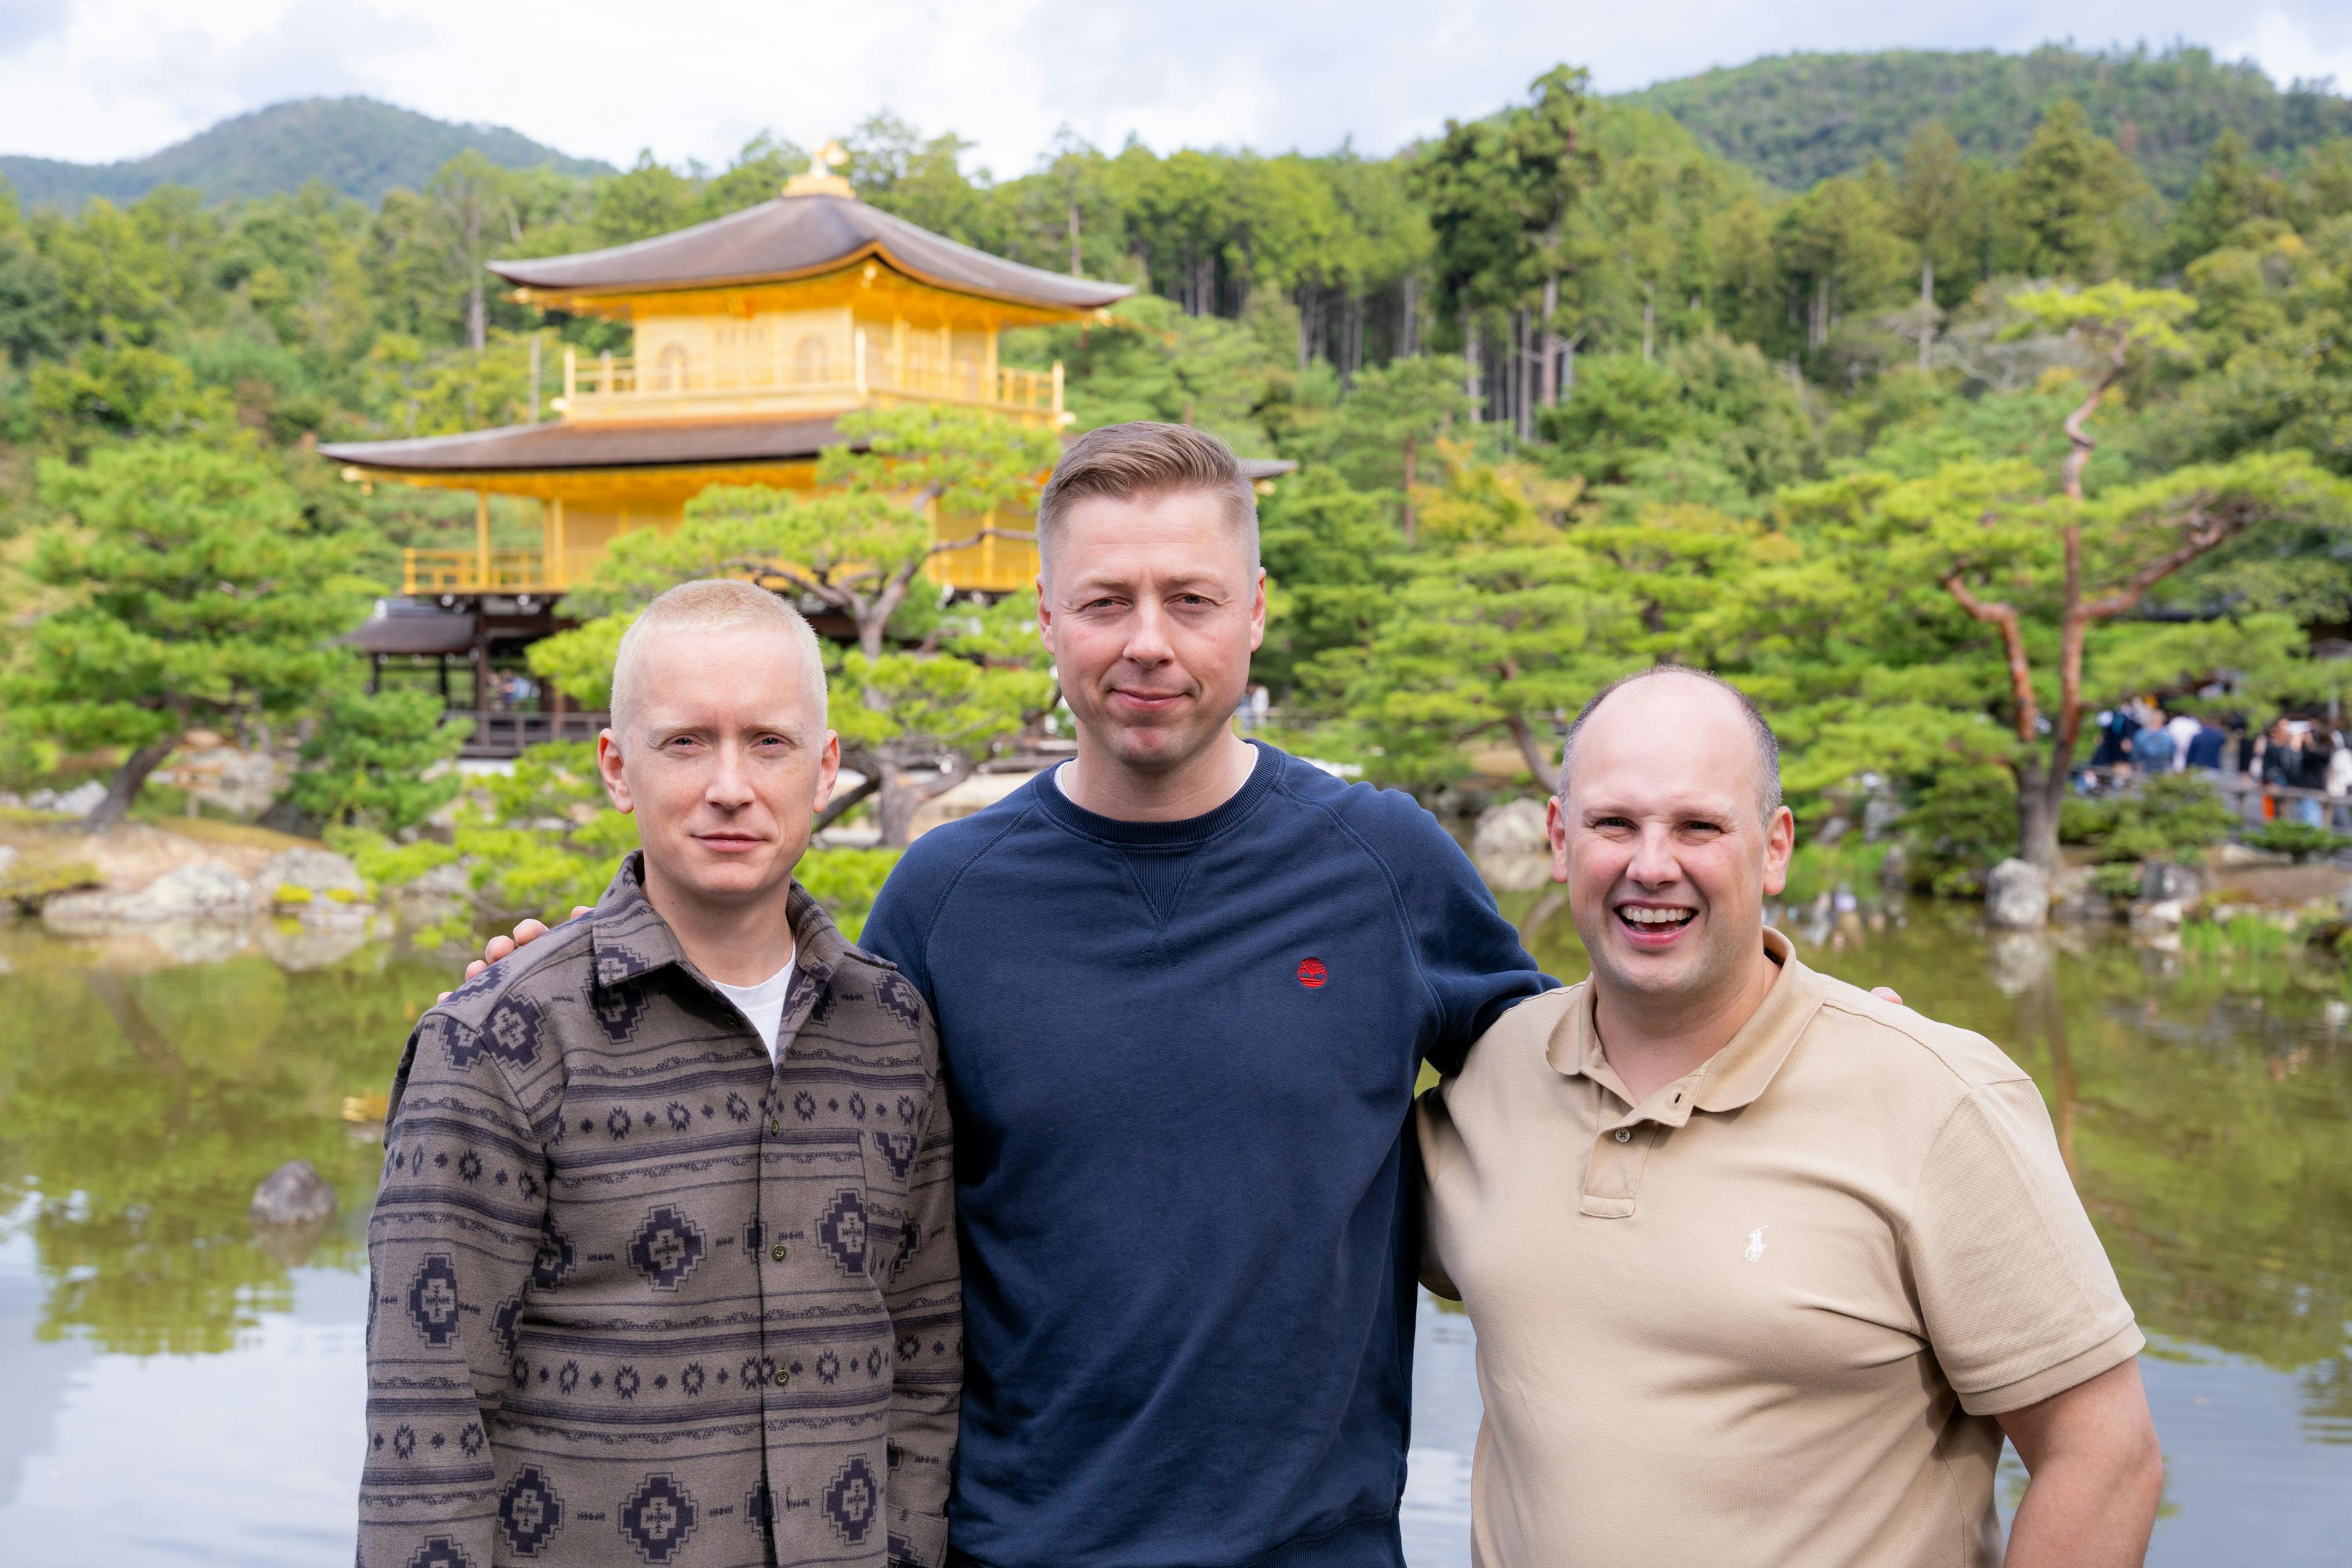 Founders in front of Golden Pavilion